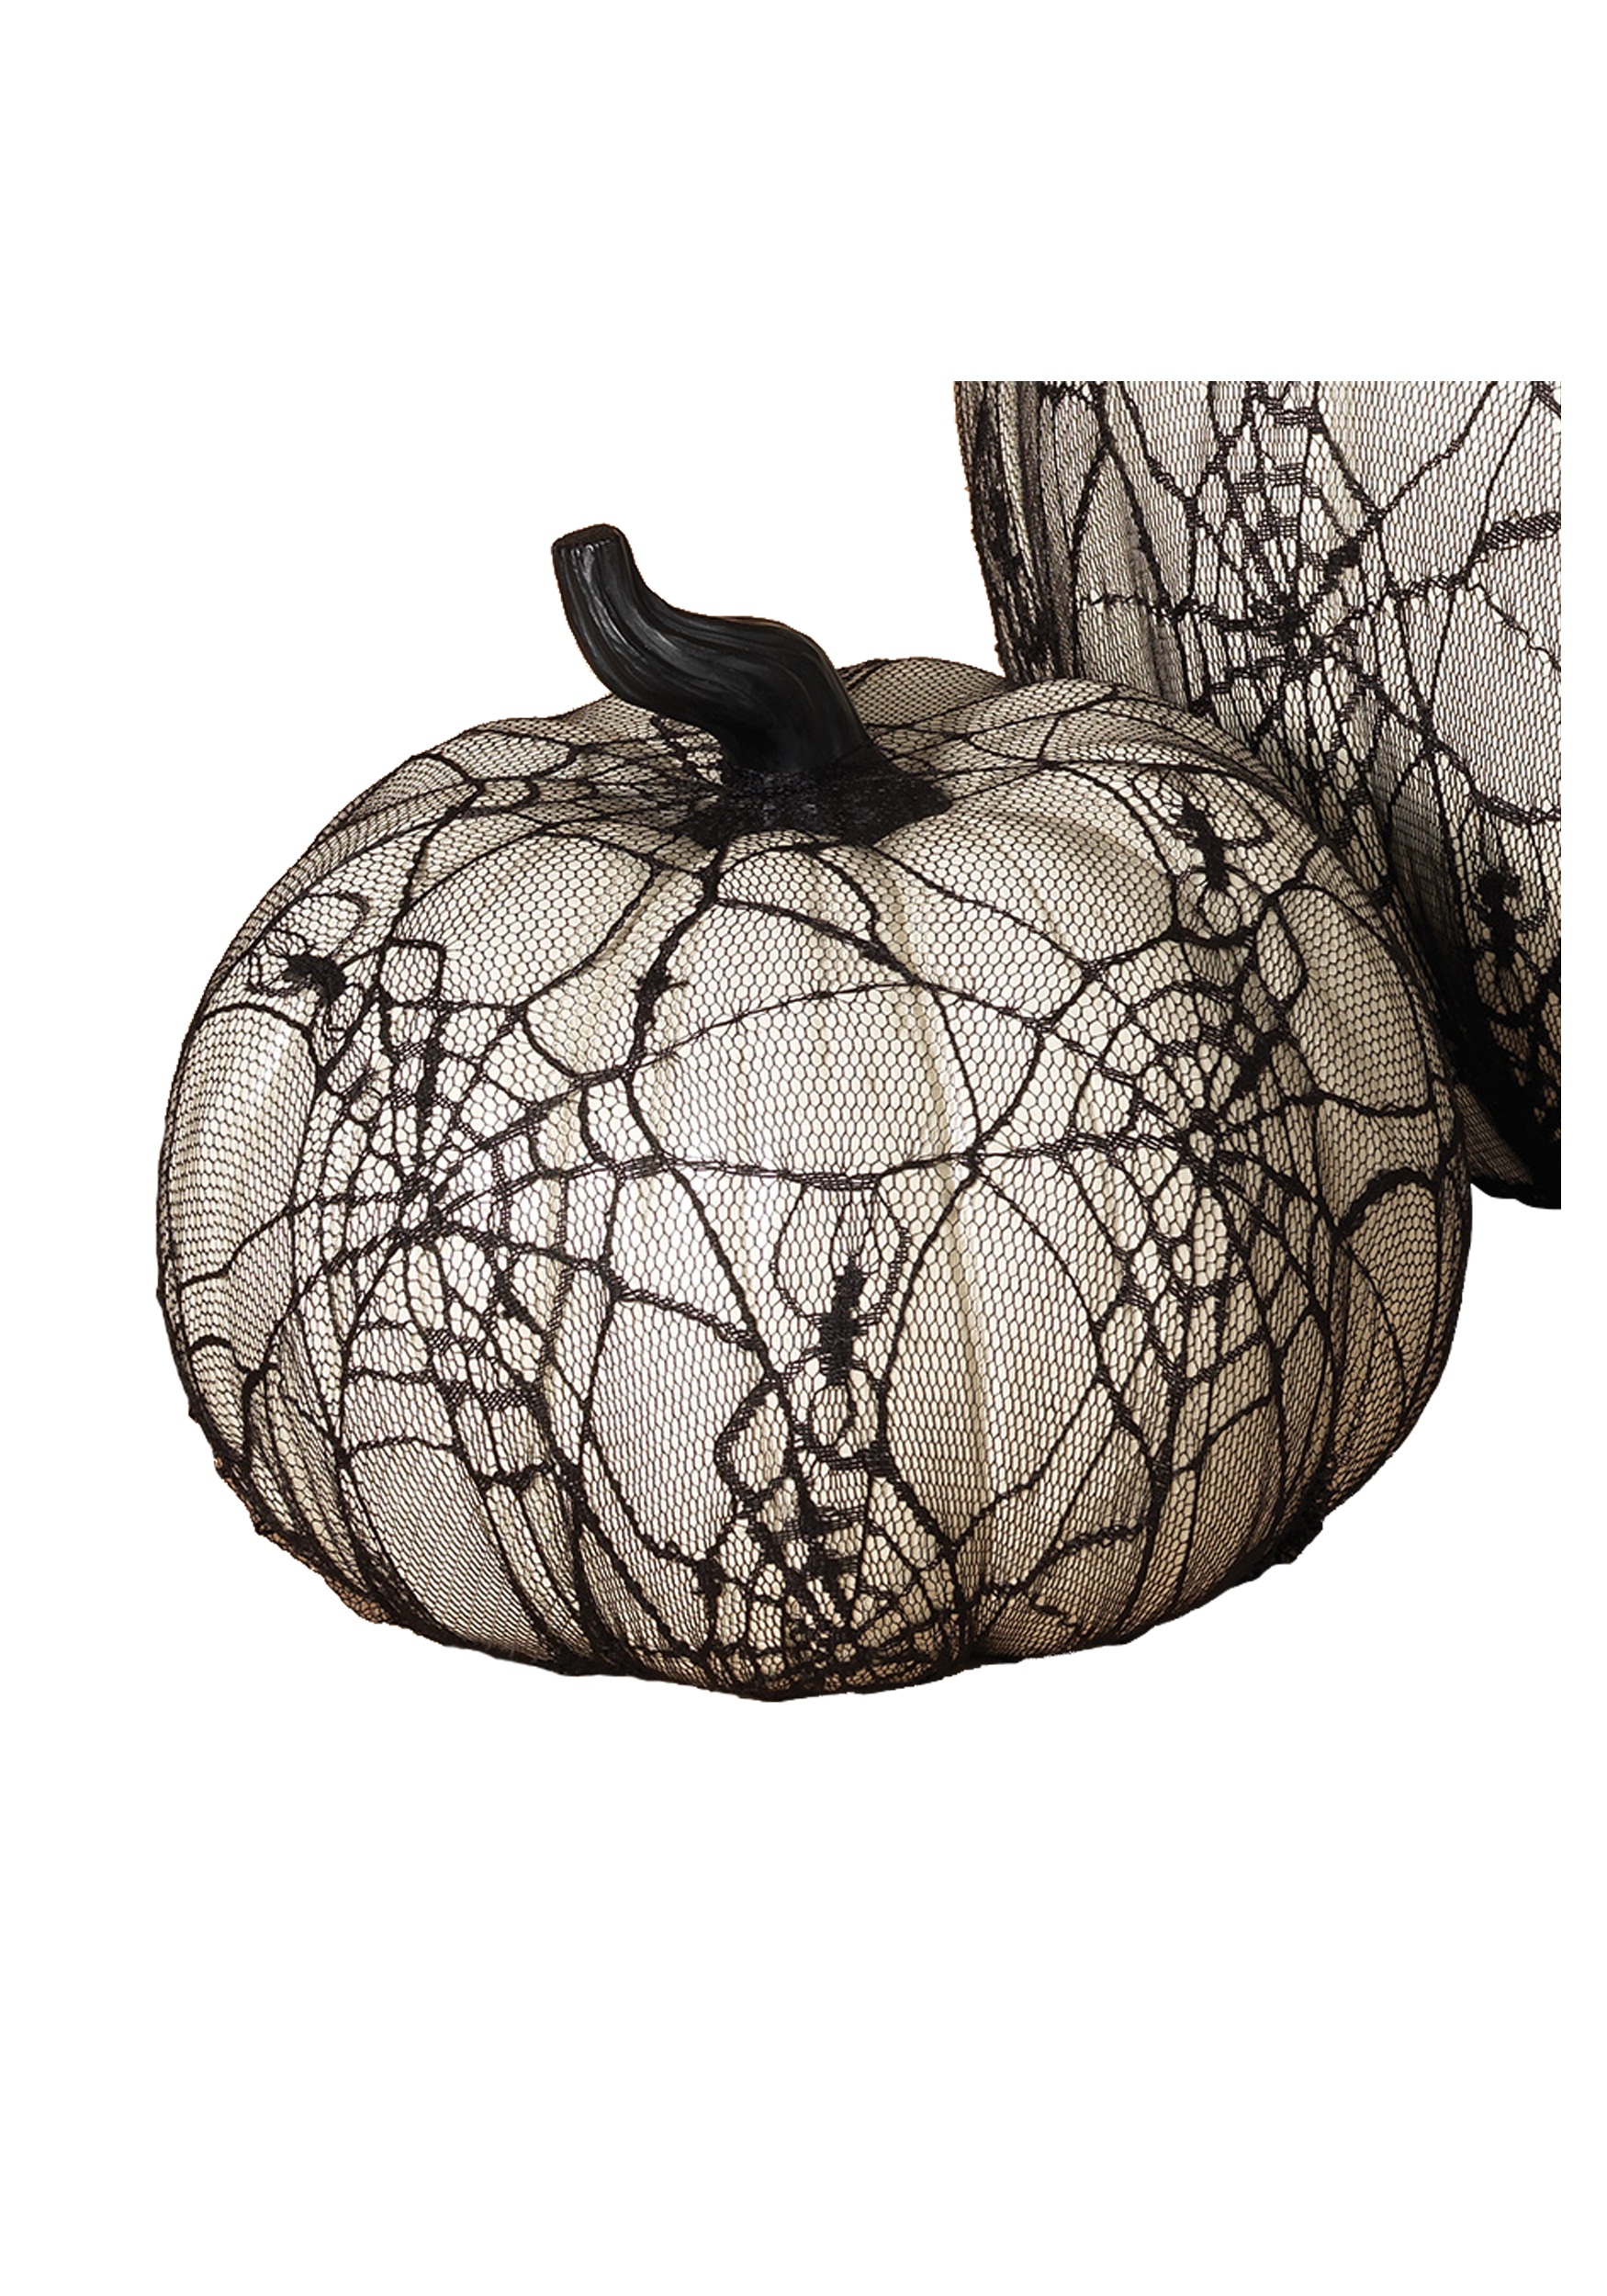 7.7 Inch White Resin Pumpkin with Spider Web Lace Covering